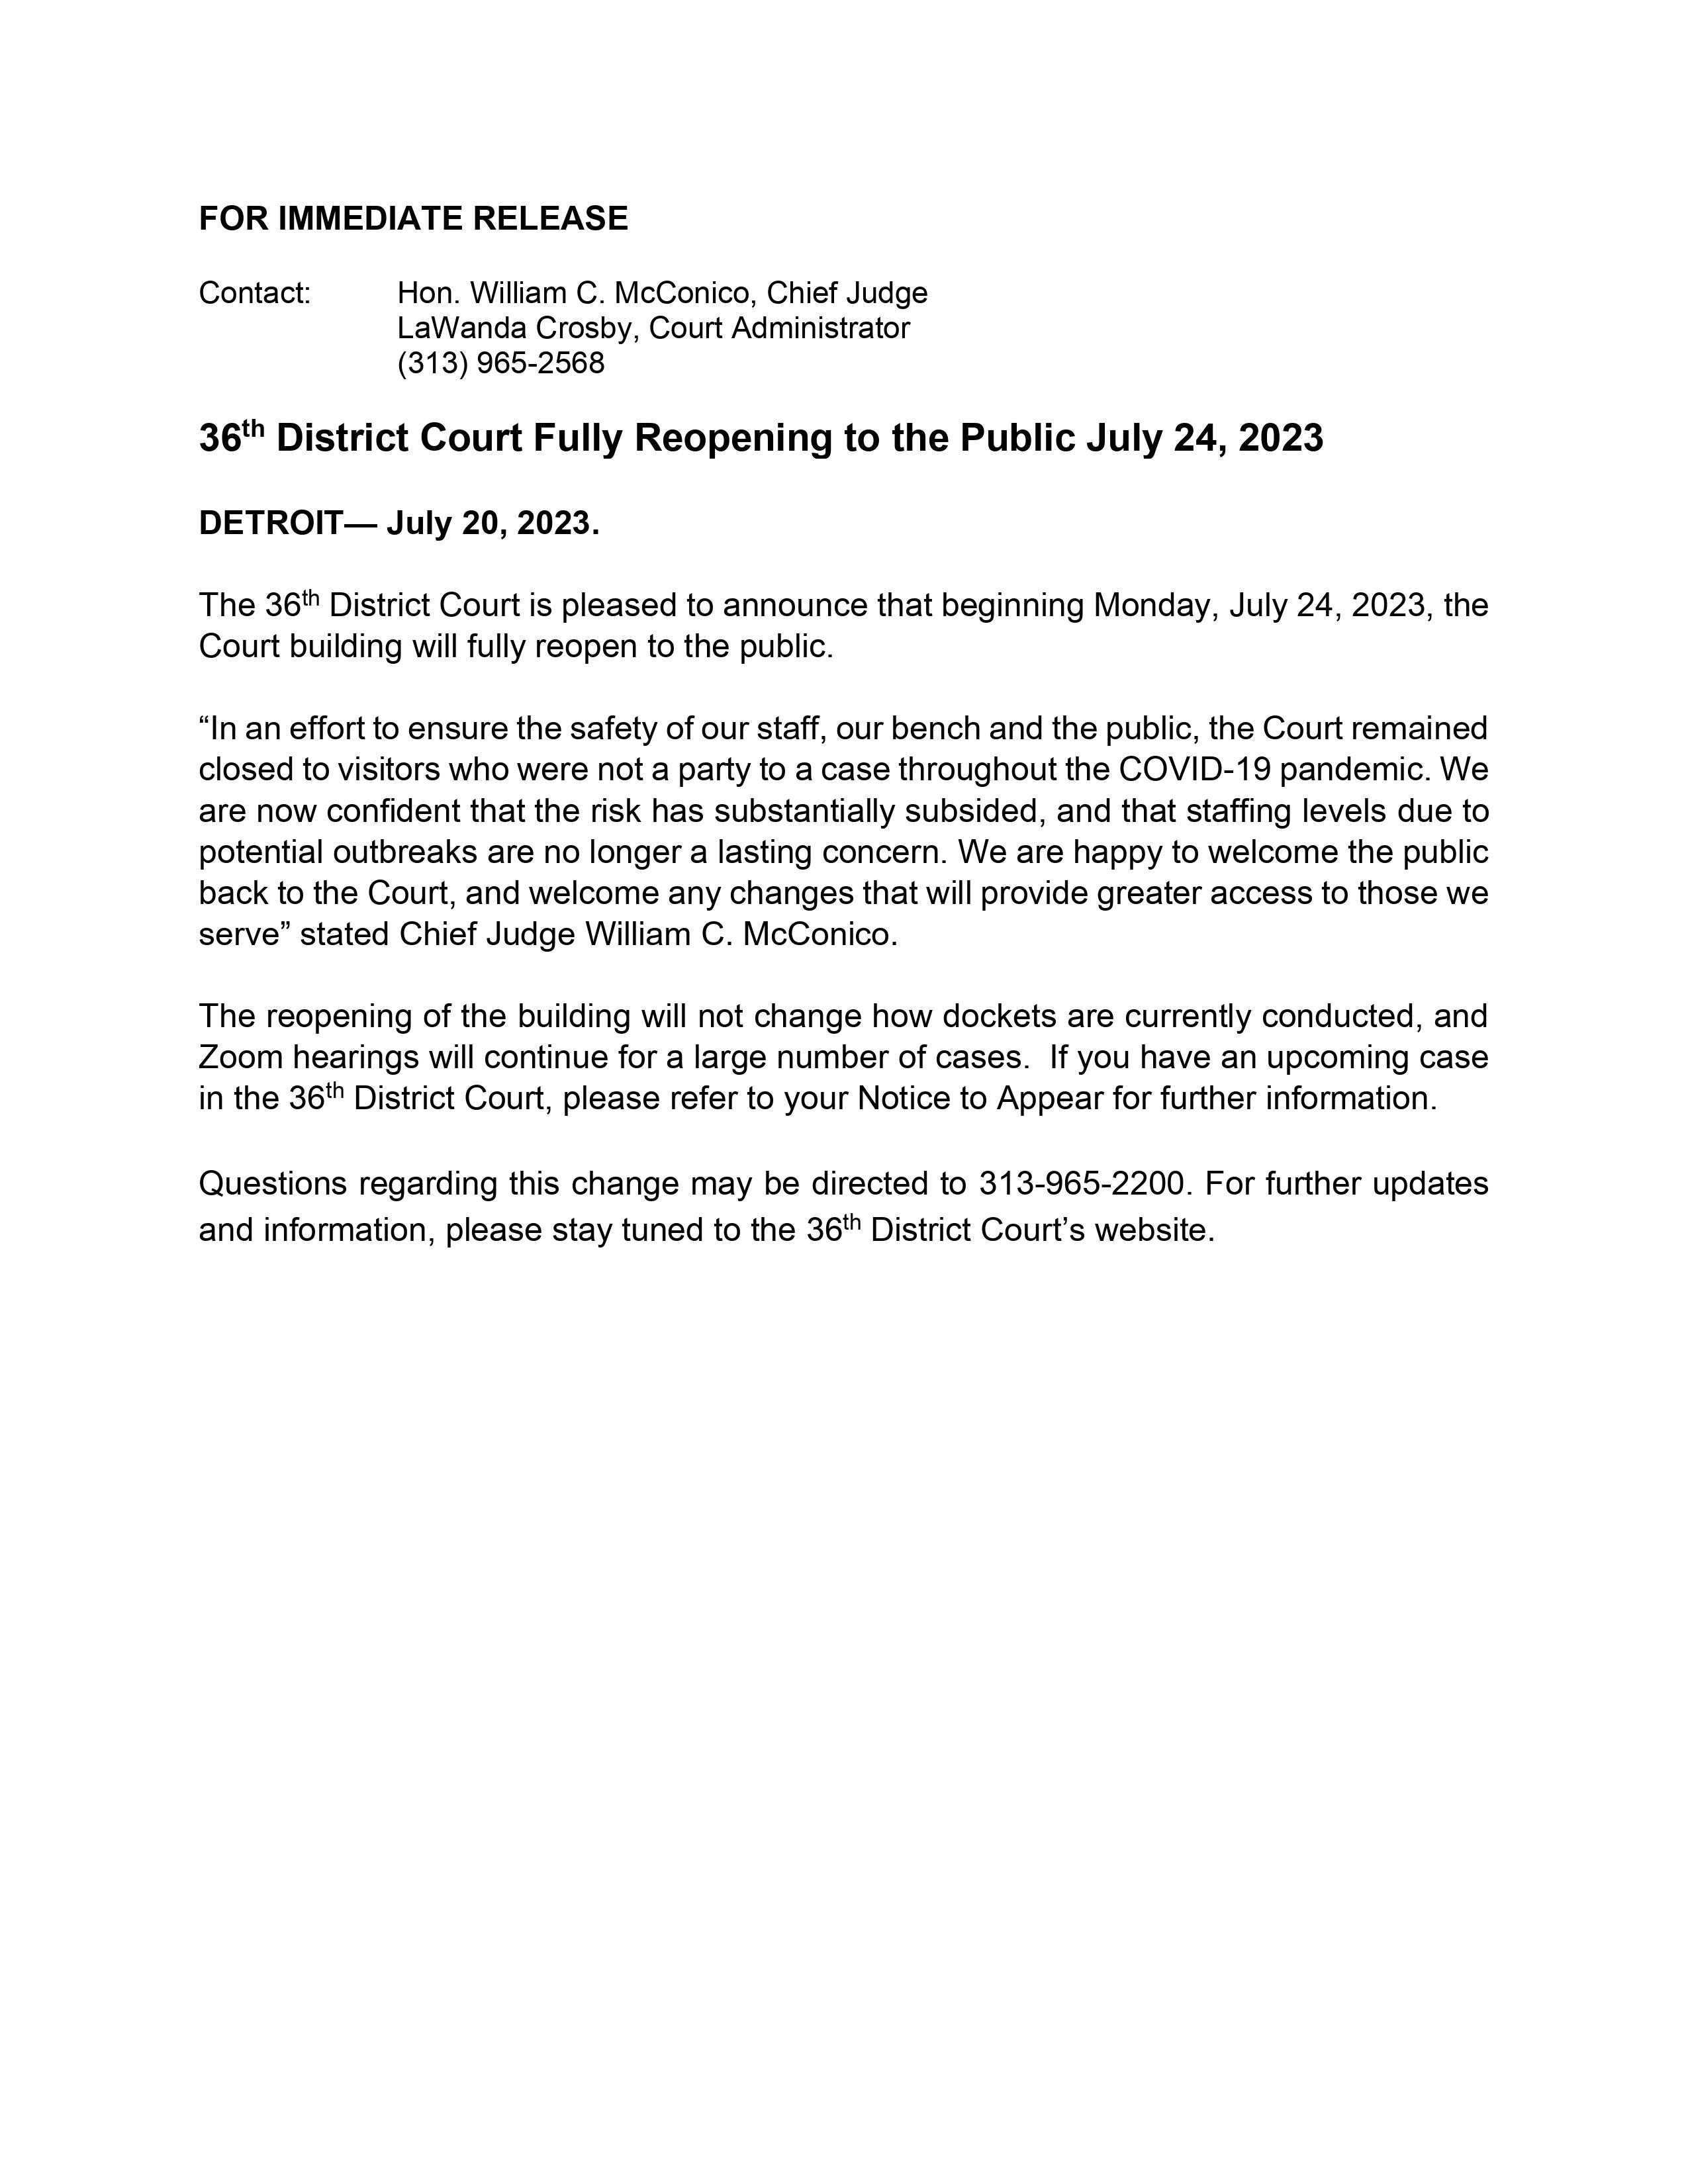 Press Release - Reopening